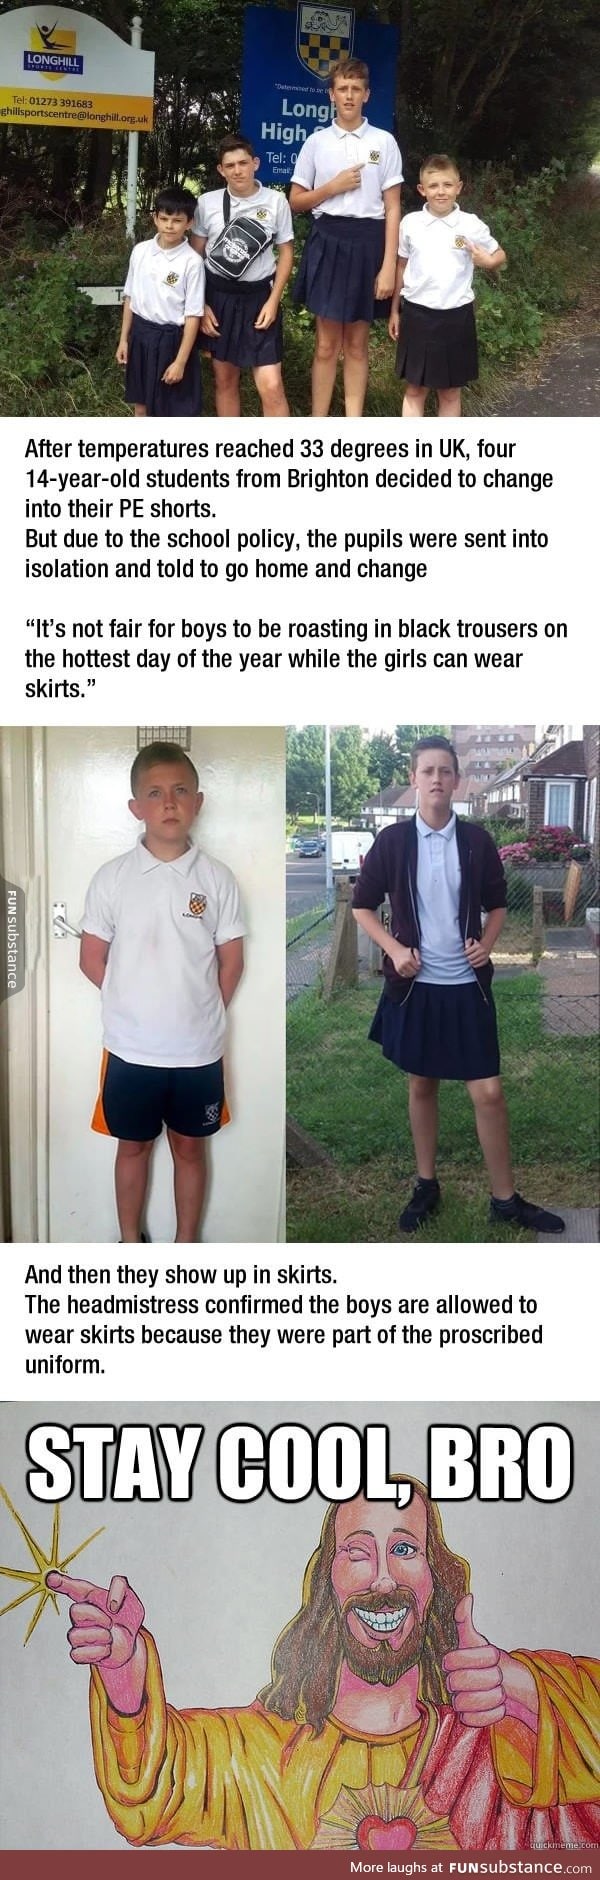 Schoolboys wearing skirts on hot days